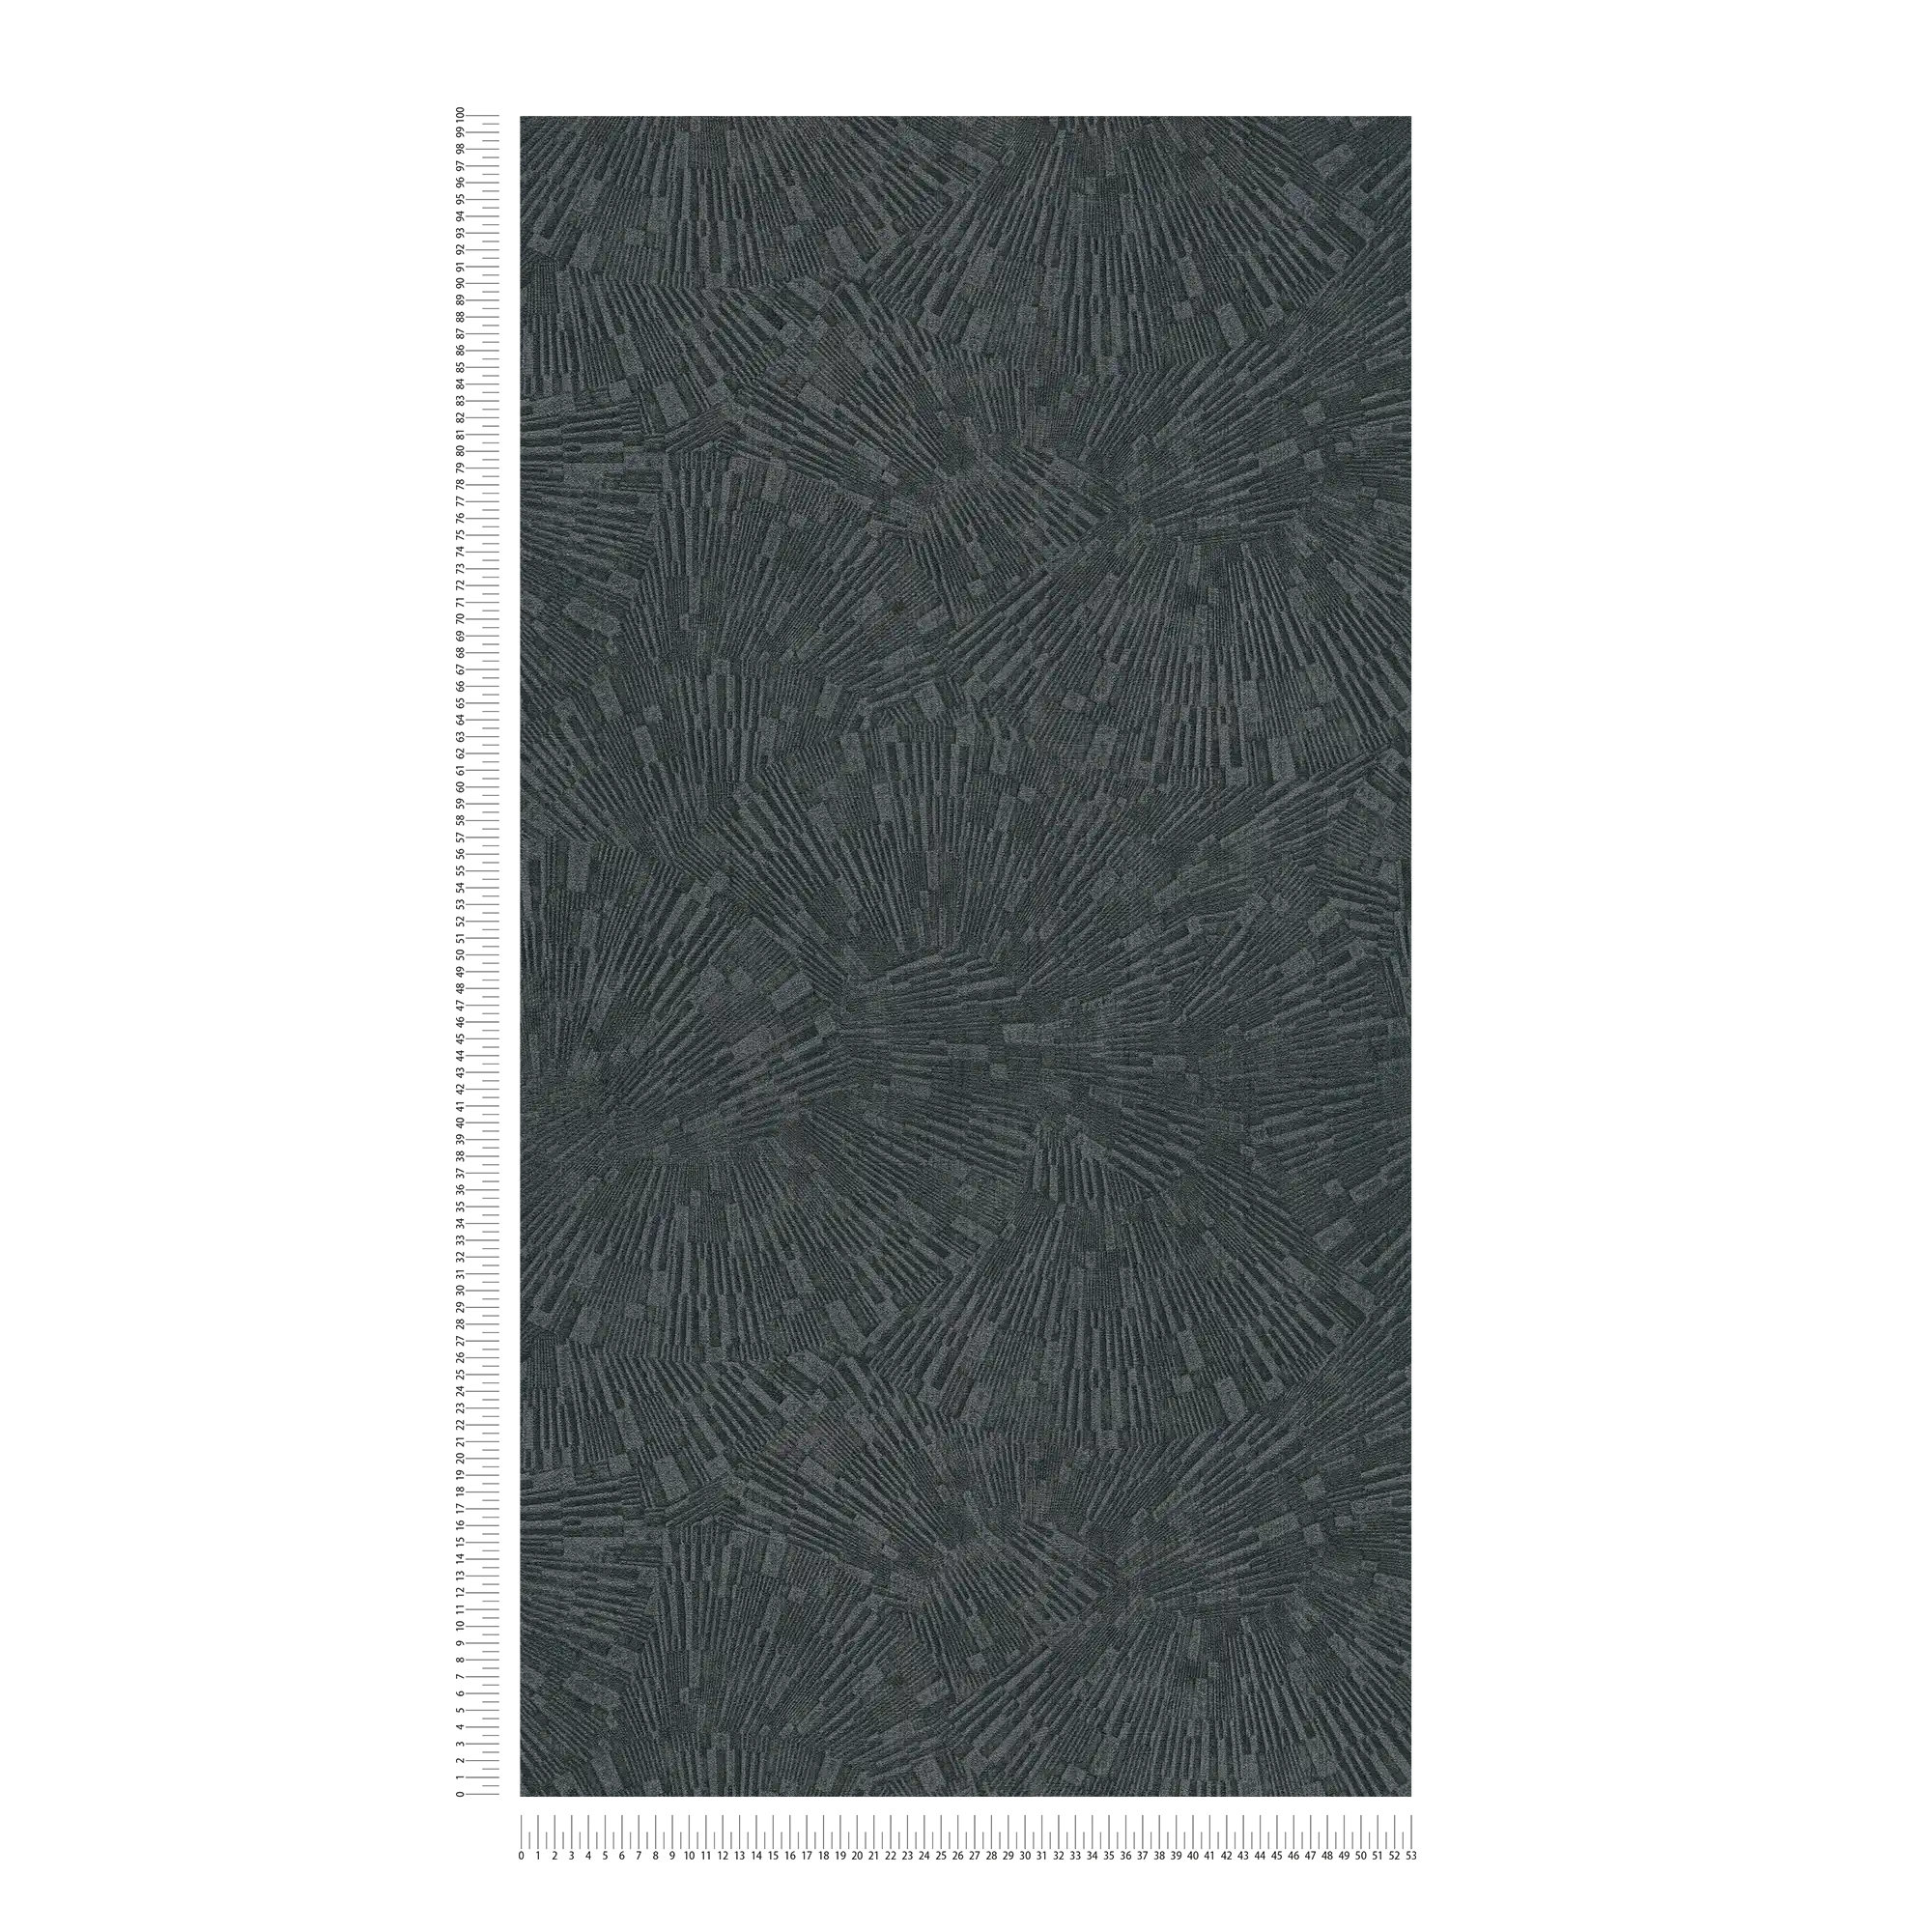             Black wallpaper glossy with texture effect - brown, black
        